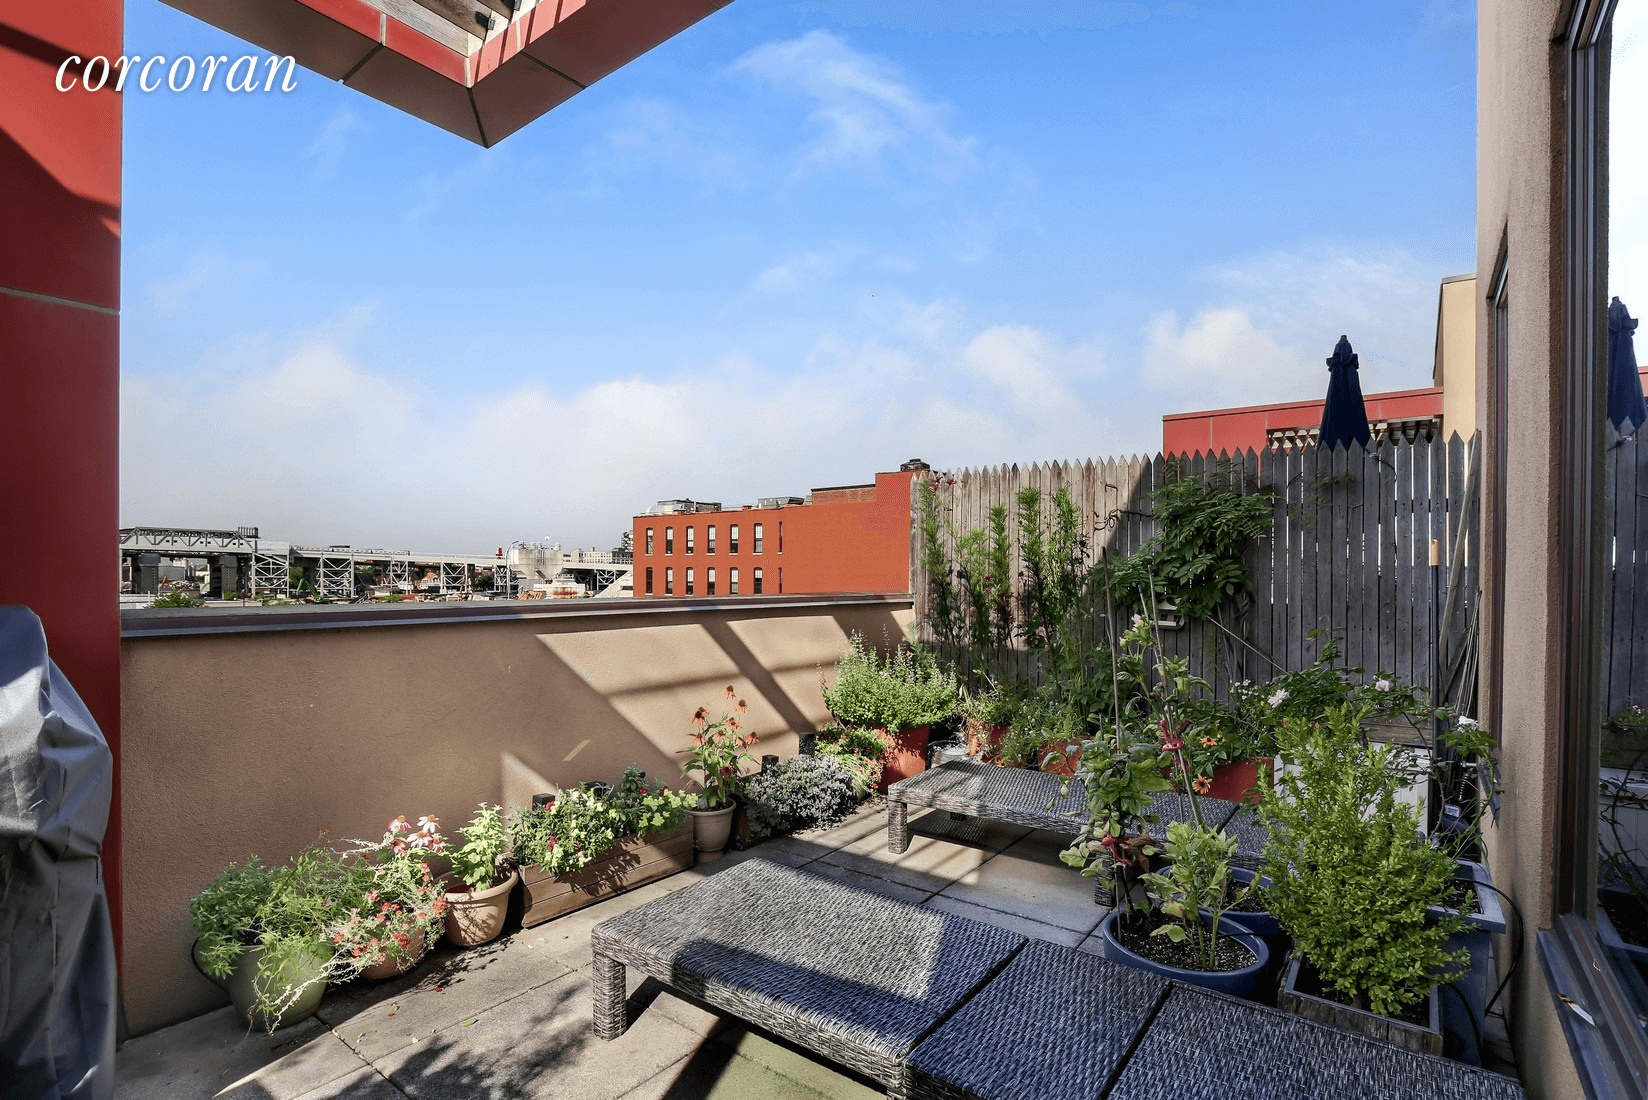 107 3rd Street 5 is an immaculate penthouse duplex condo with a huge South facing terrace at Third Bond, a LEED Platinum building by Marvel Architects in leafy Carroll Gardens.